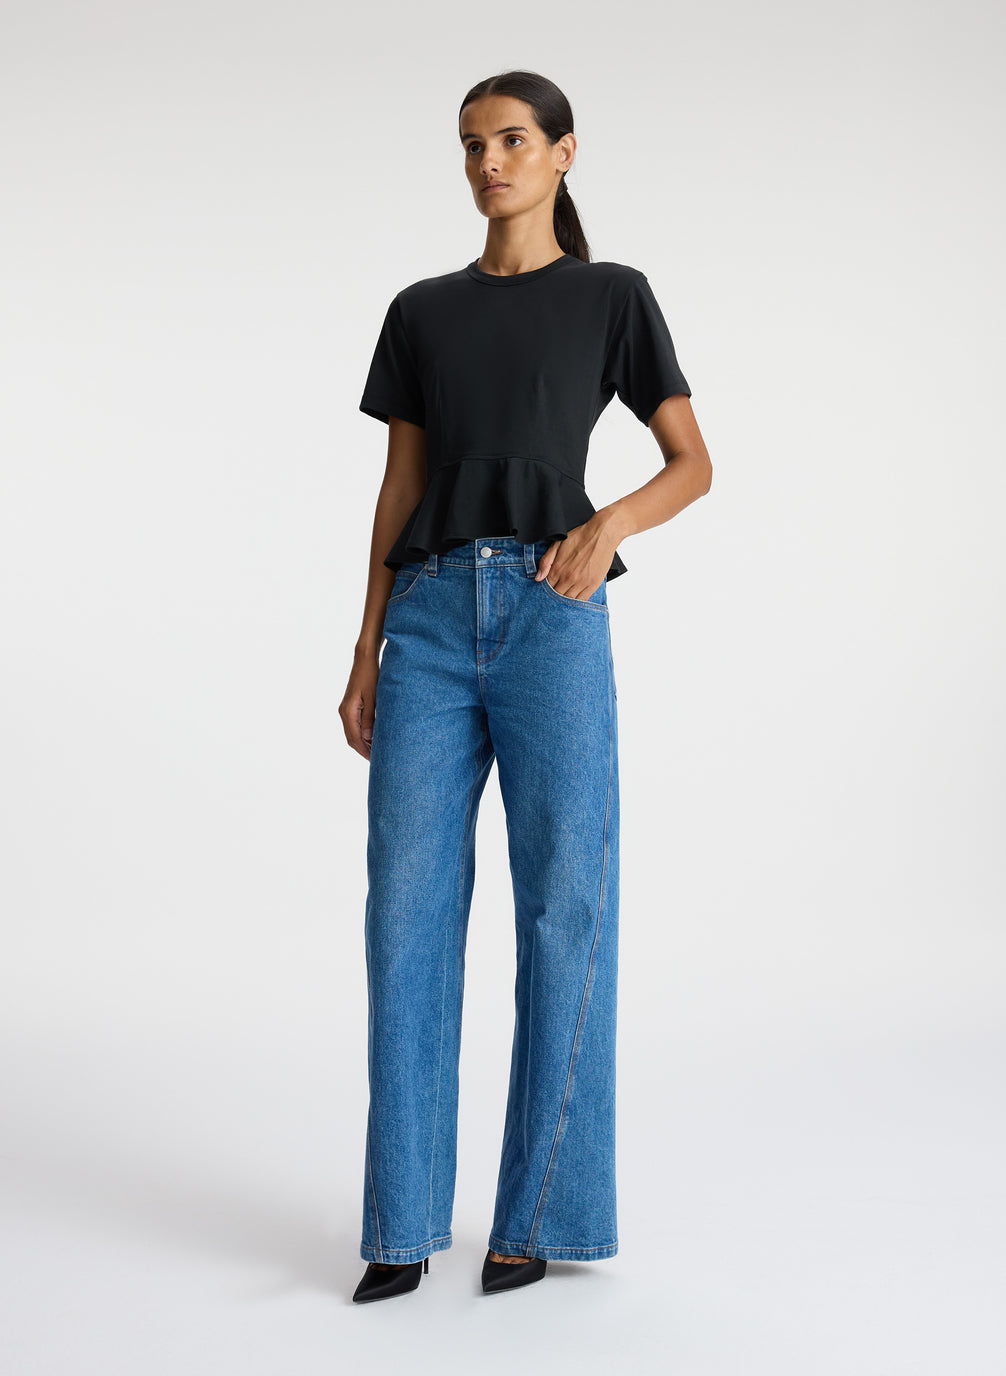 side view of woman wearing black peplum tee and blue jeans